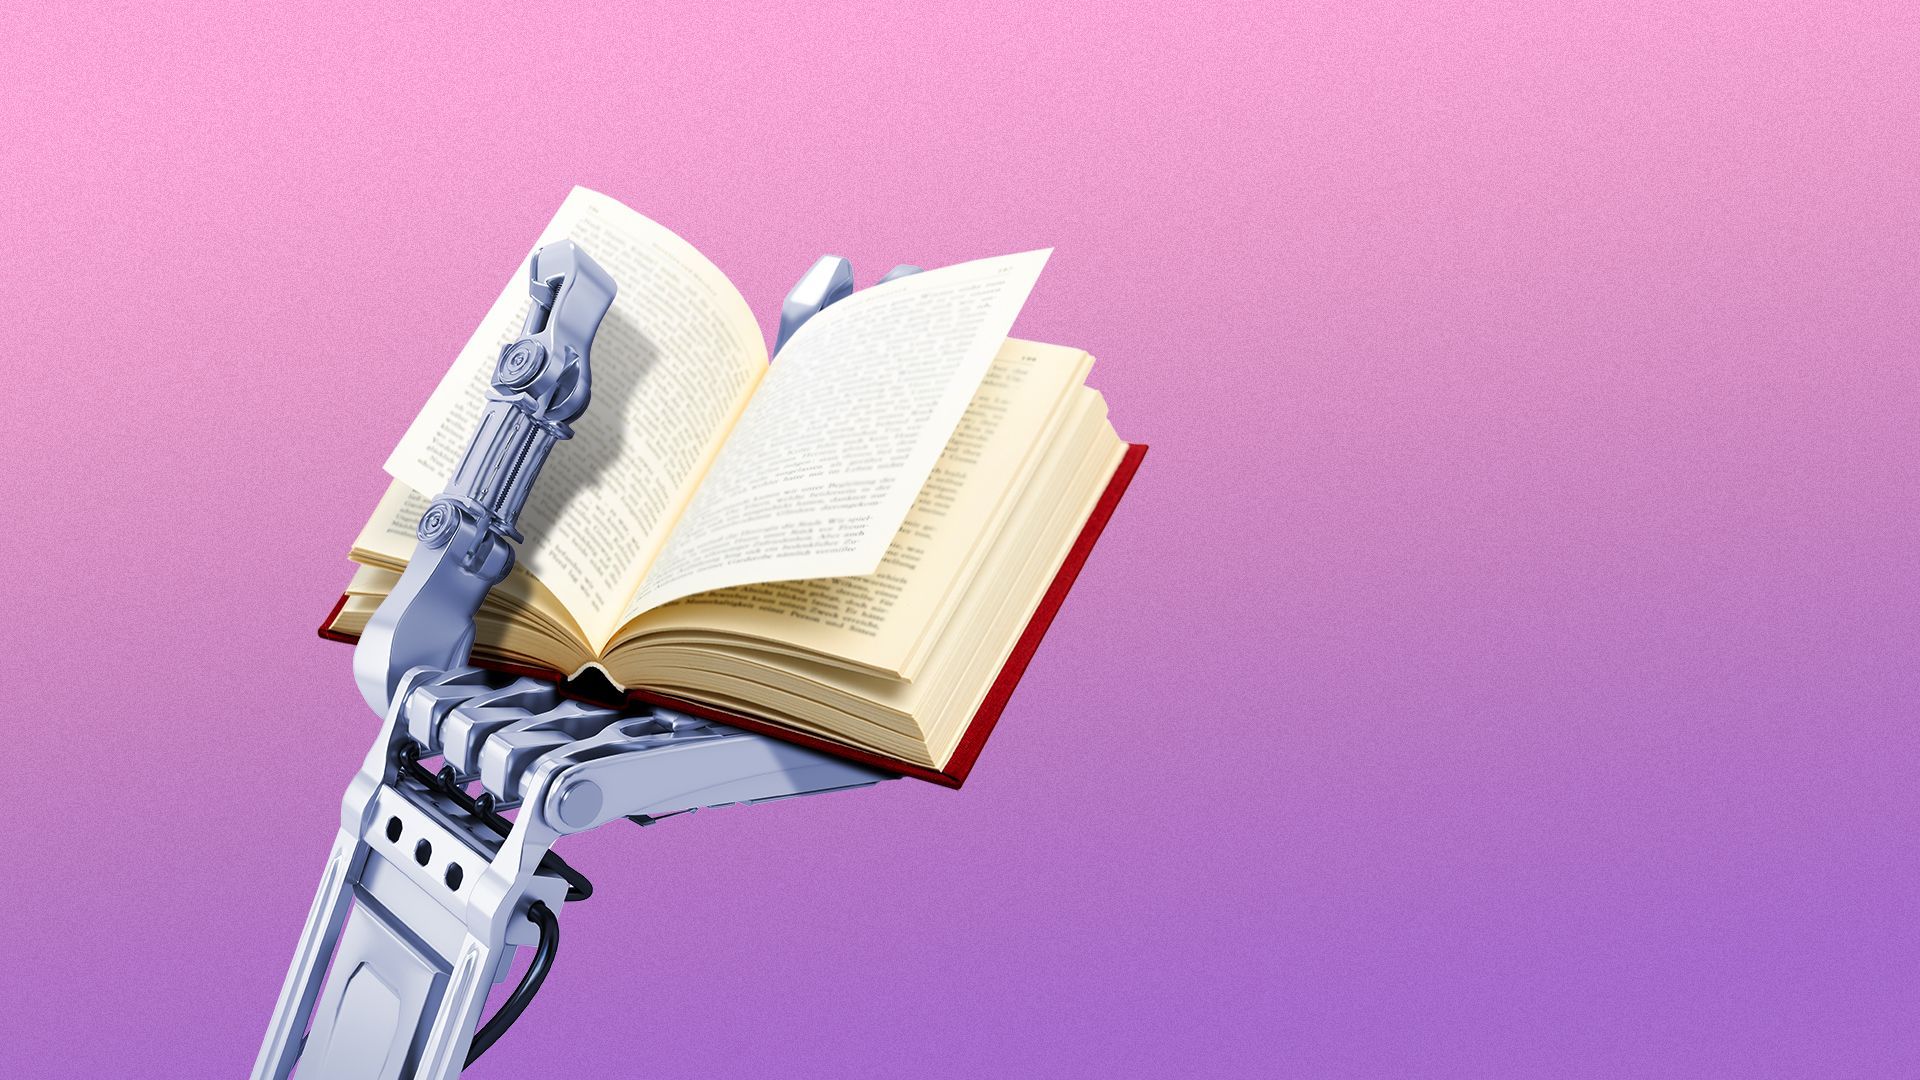 Illustration of a robot hand holding a book